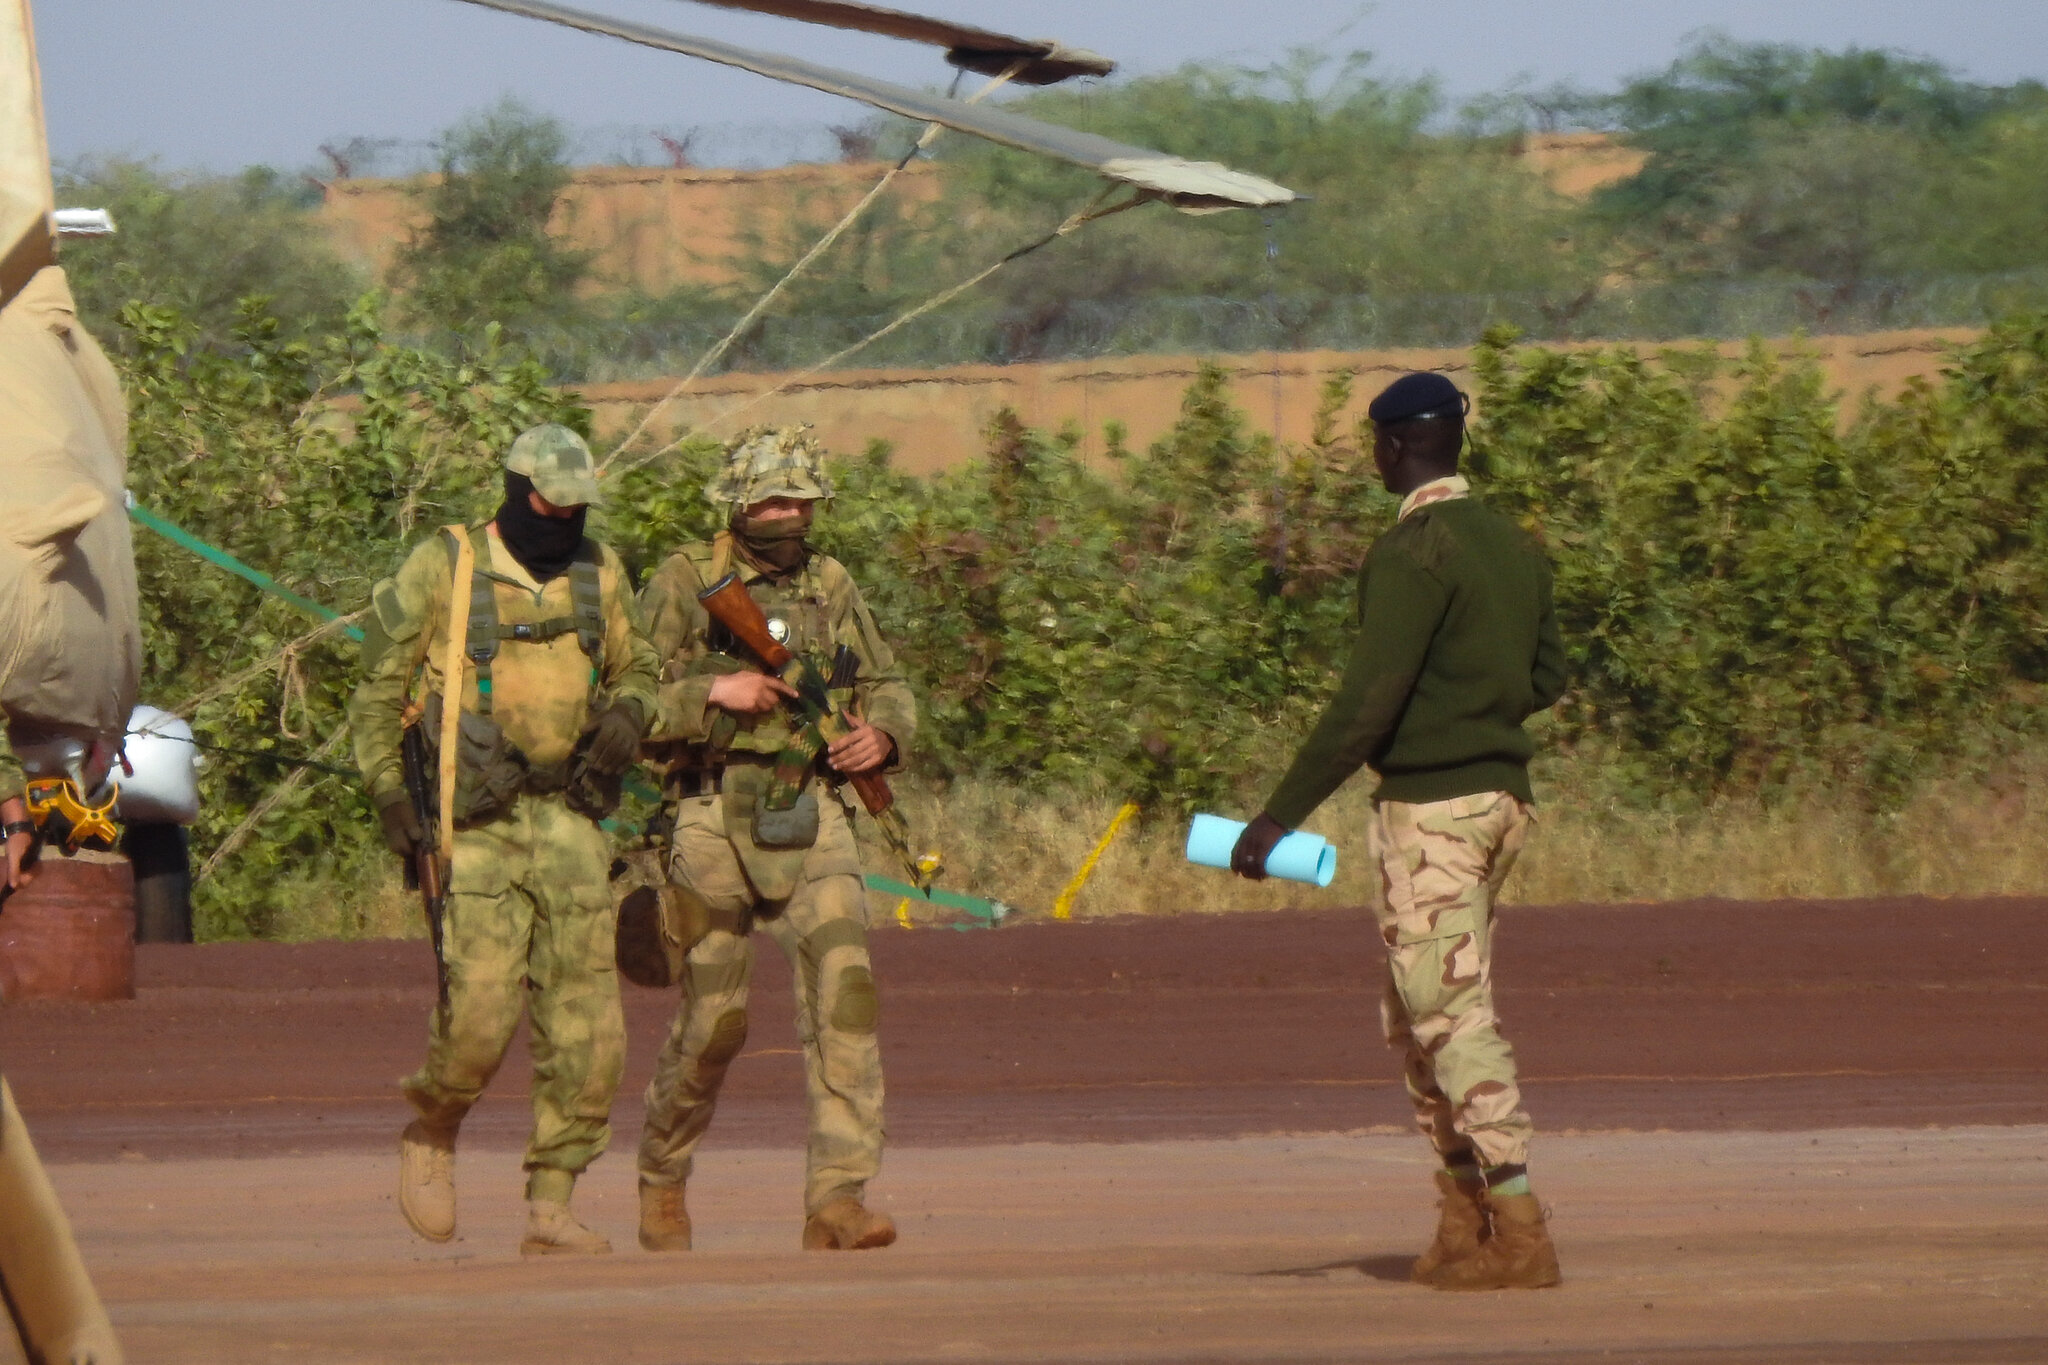 “Wagner Group Implicated in Civilian Deaths: HRW Report on Mali”